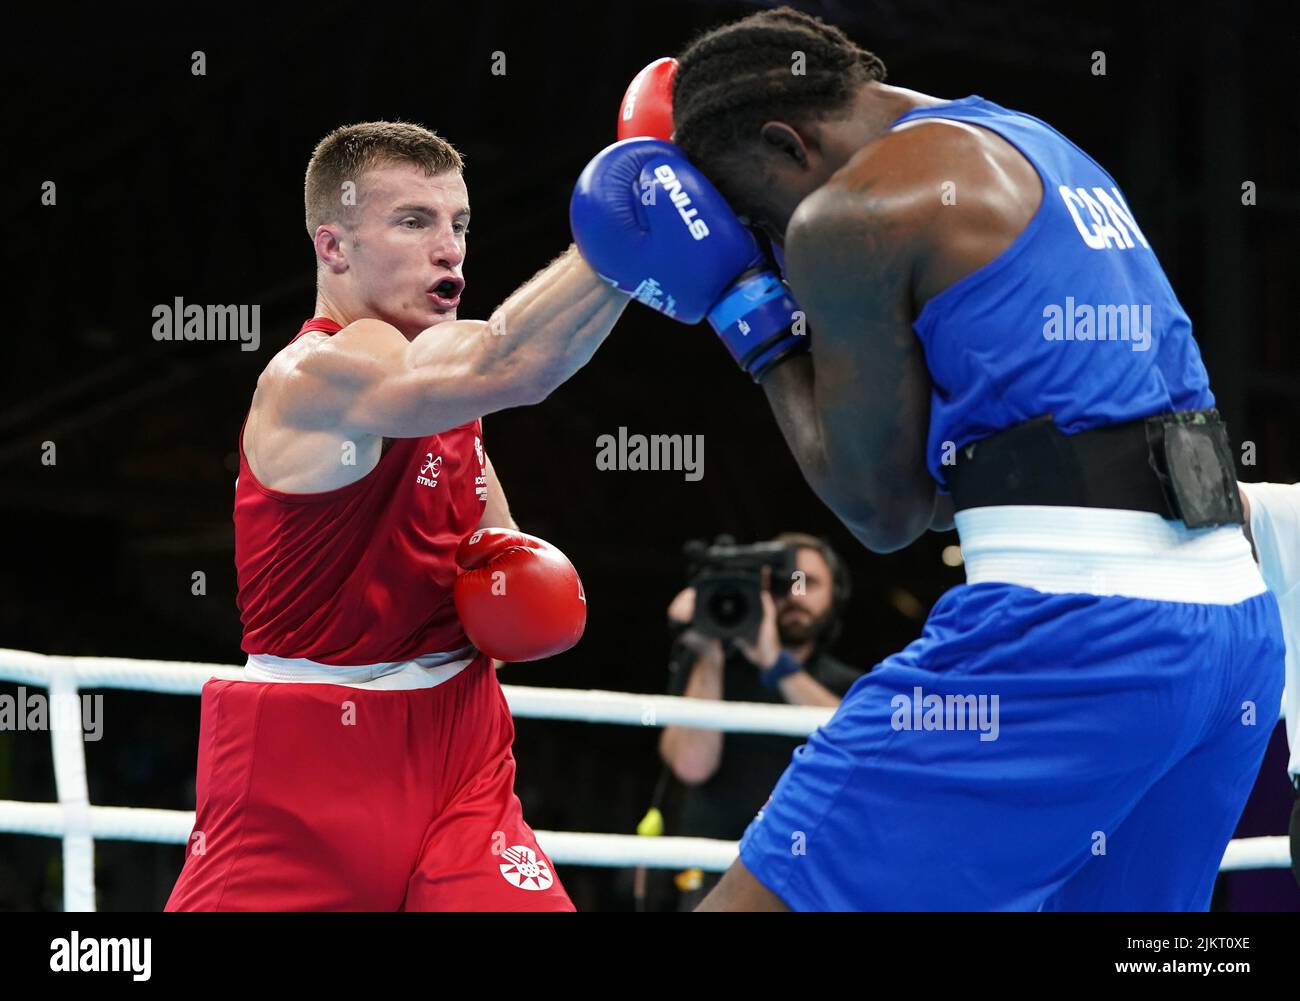 Scotland's Sean Lazzerini on his way to victory over Canada's Keven Beausejour following the Men's Over 75kg-80kg (Light Heavyweight) - Quarter-Final 1 at The NEC on day six of the 2022 Commonwealth Games in Birmingham. Picture date: Wednesday August 3, 2022. Stock Photo